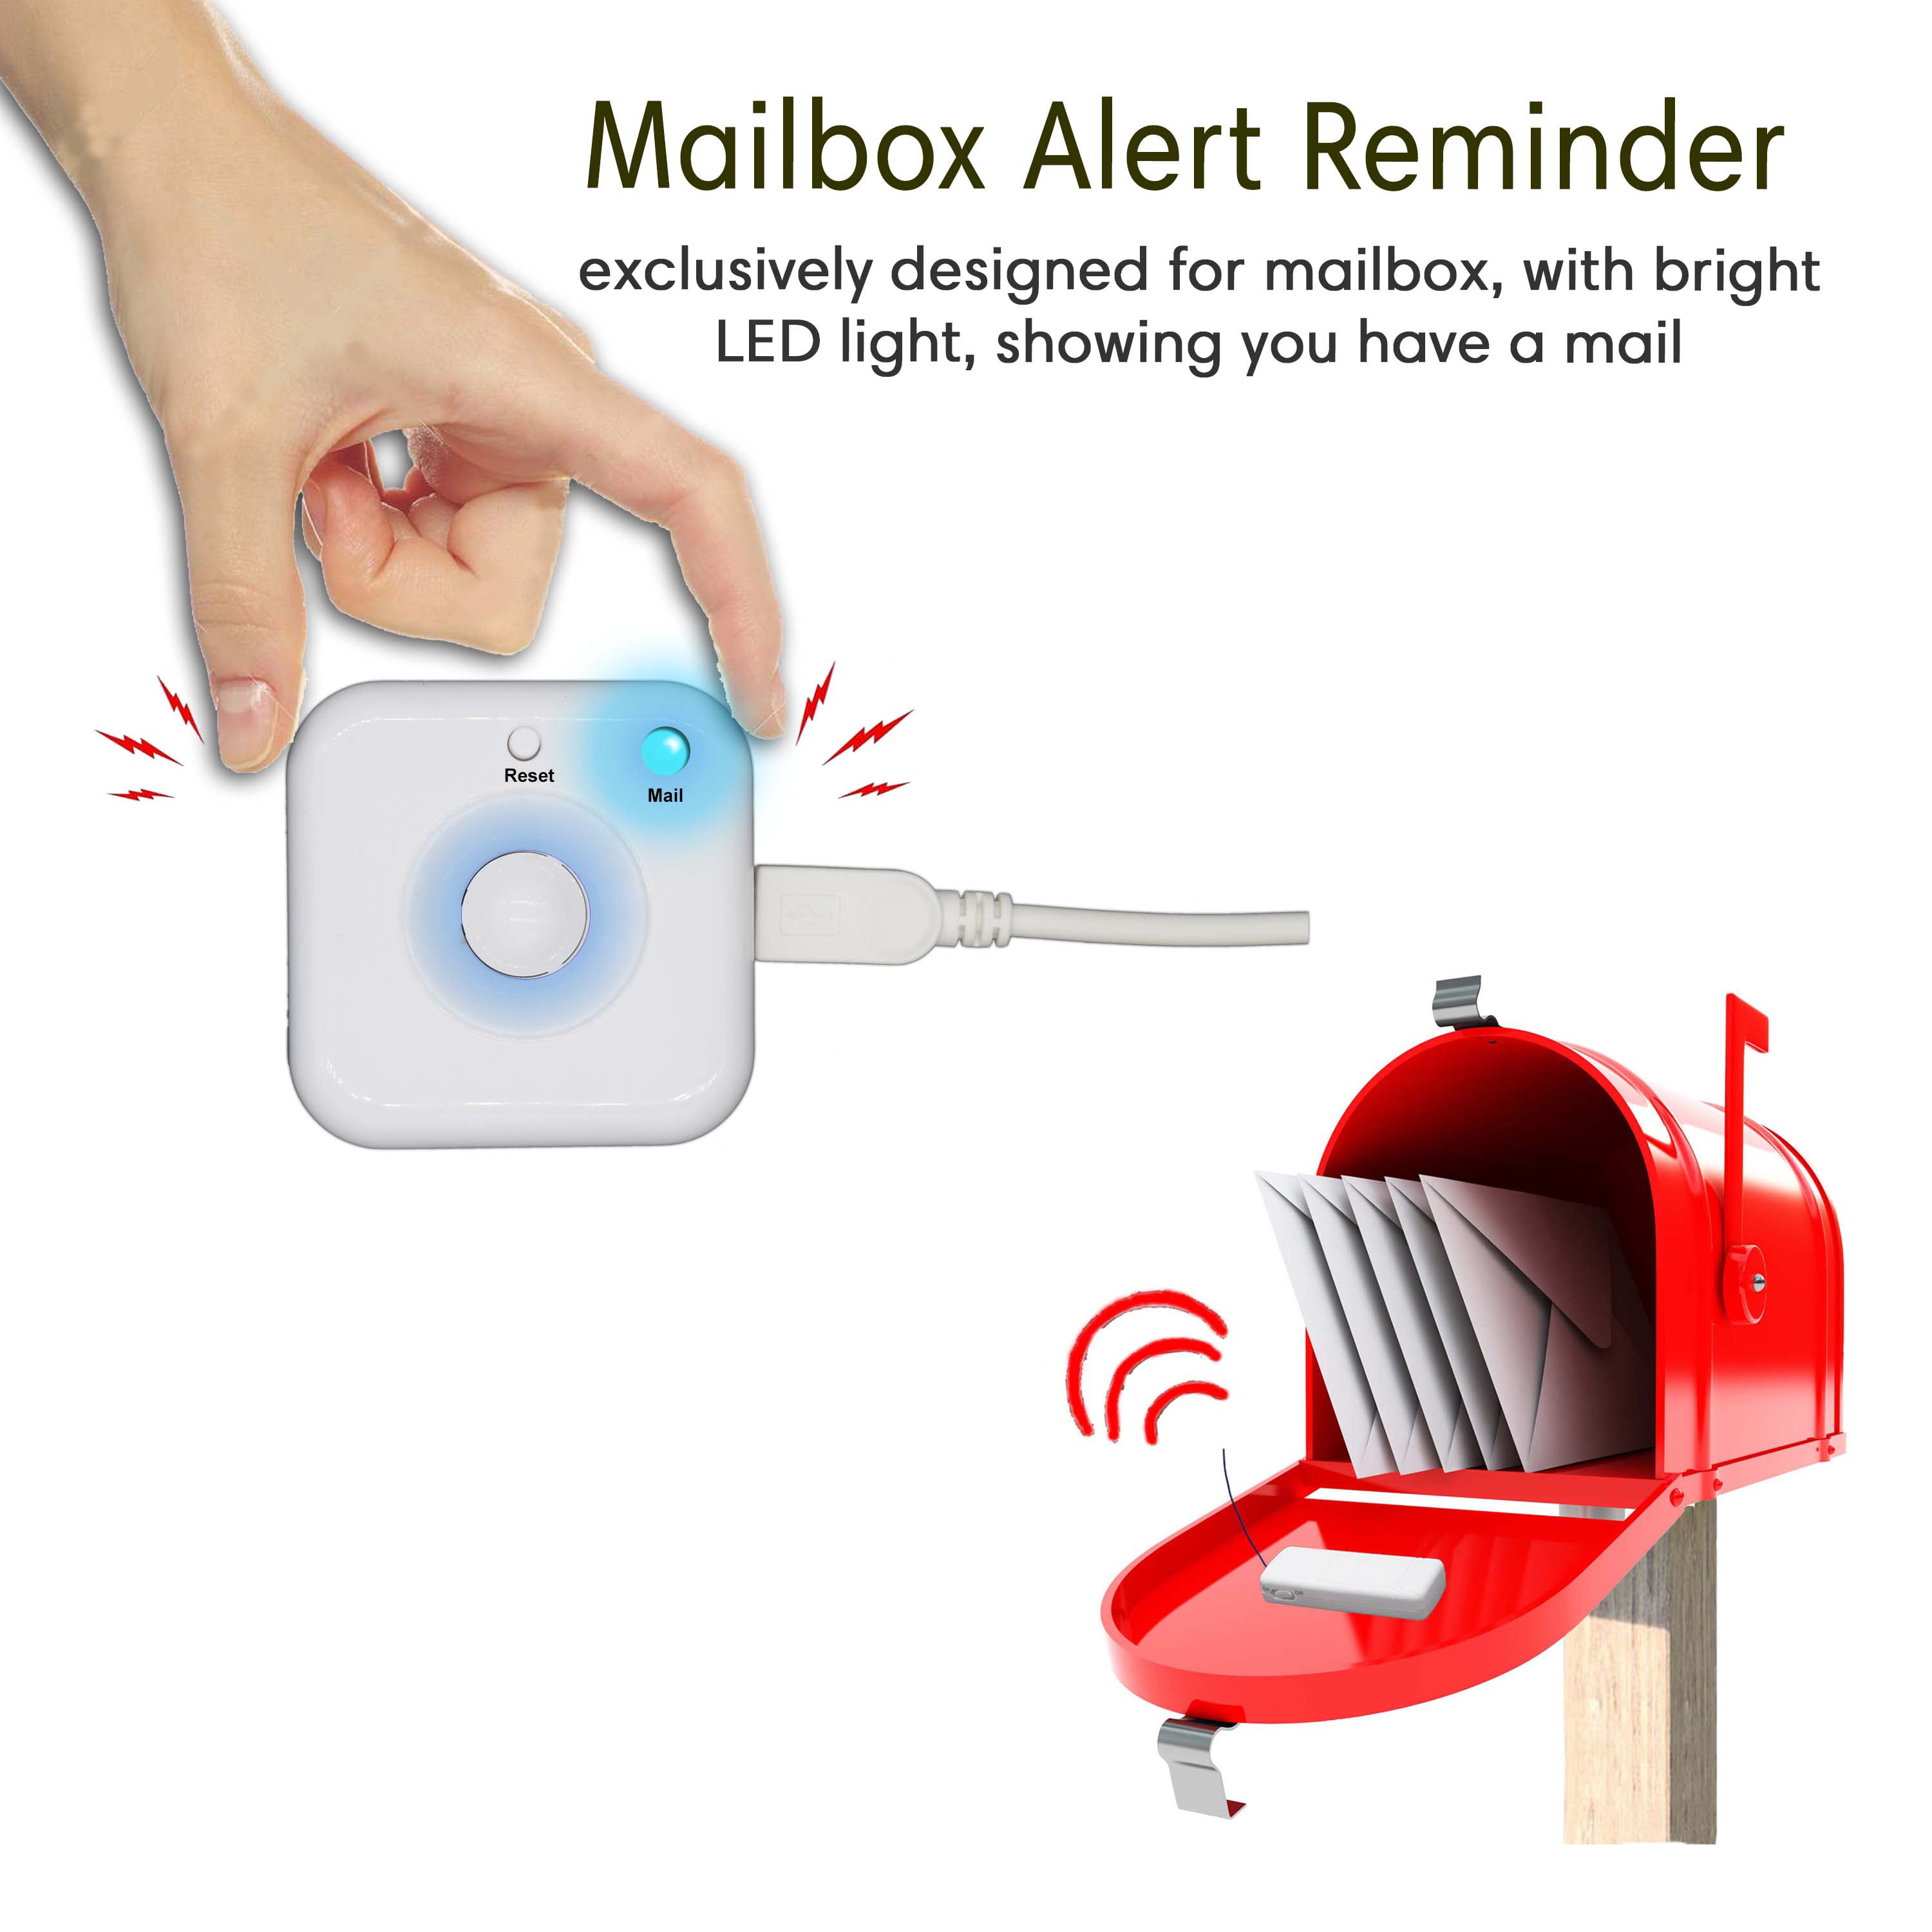 Receive Instant Notification with Bright Led When Mailbox Door is Open Mailbox Alarm SinMan Mailbox Alert Reminder Mailbox Chime